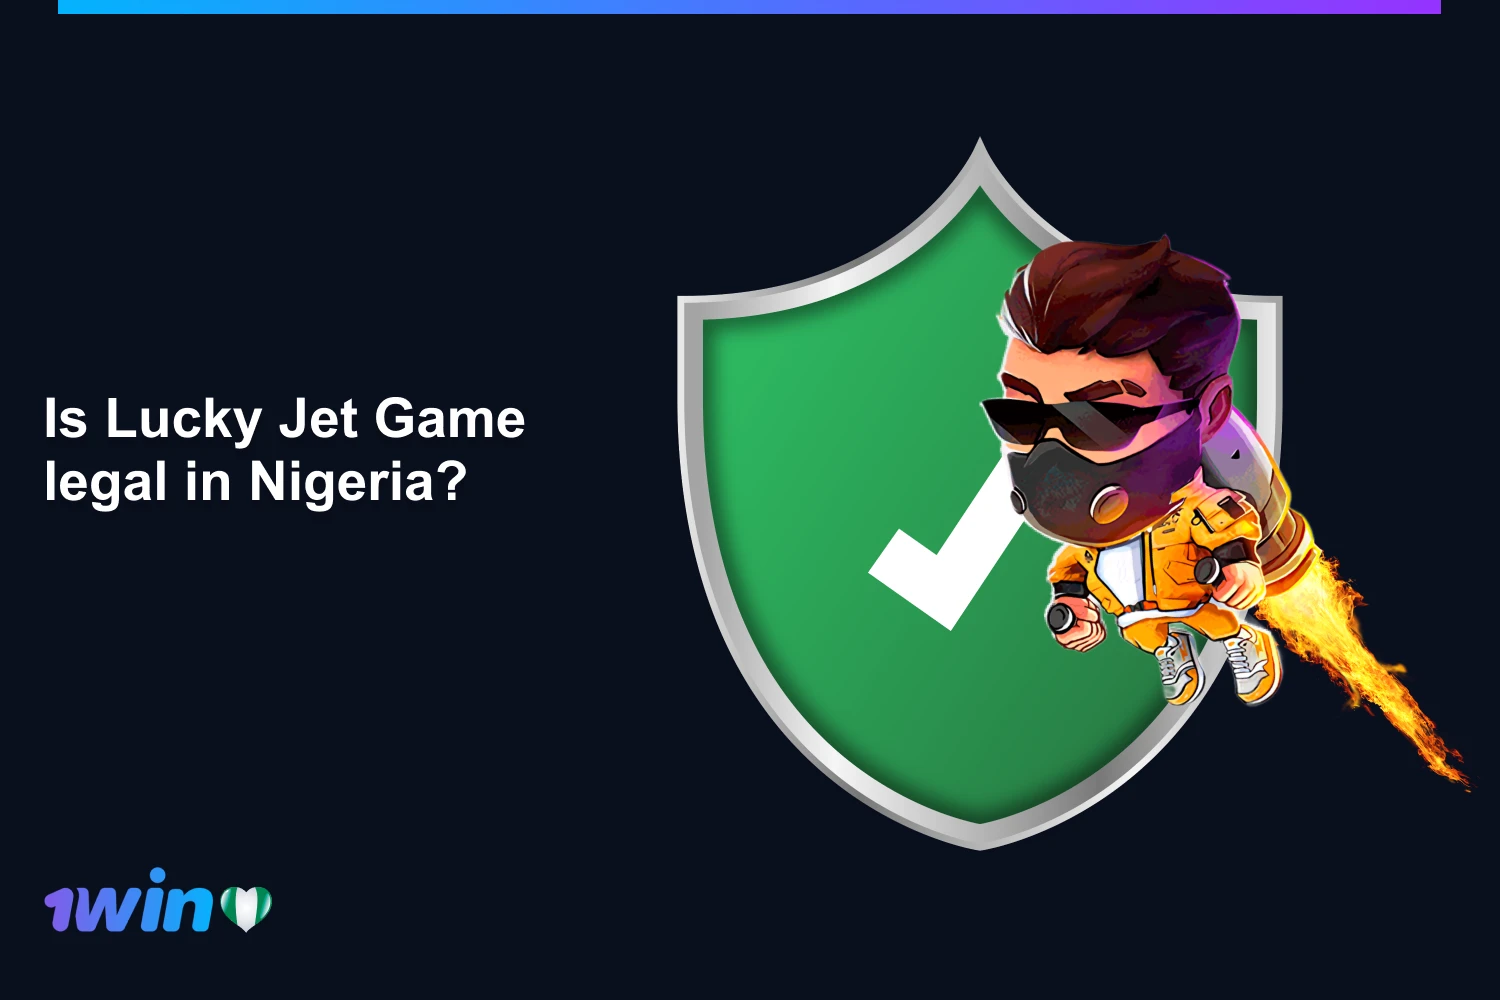 1win provides a legal and convenient gaming environment, allowing Nigerians to play Lucky Jet 1win legally